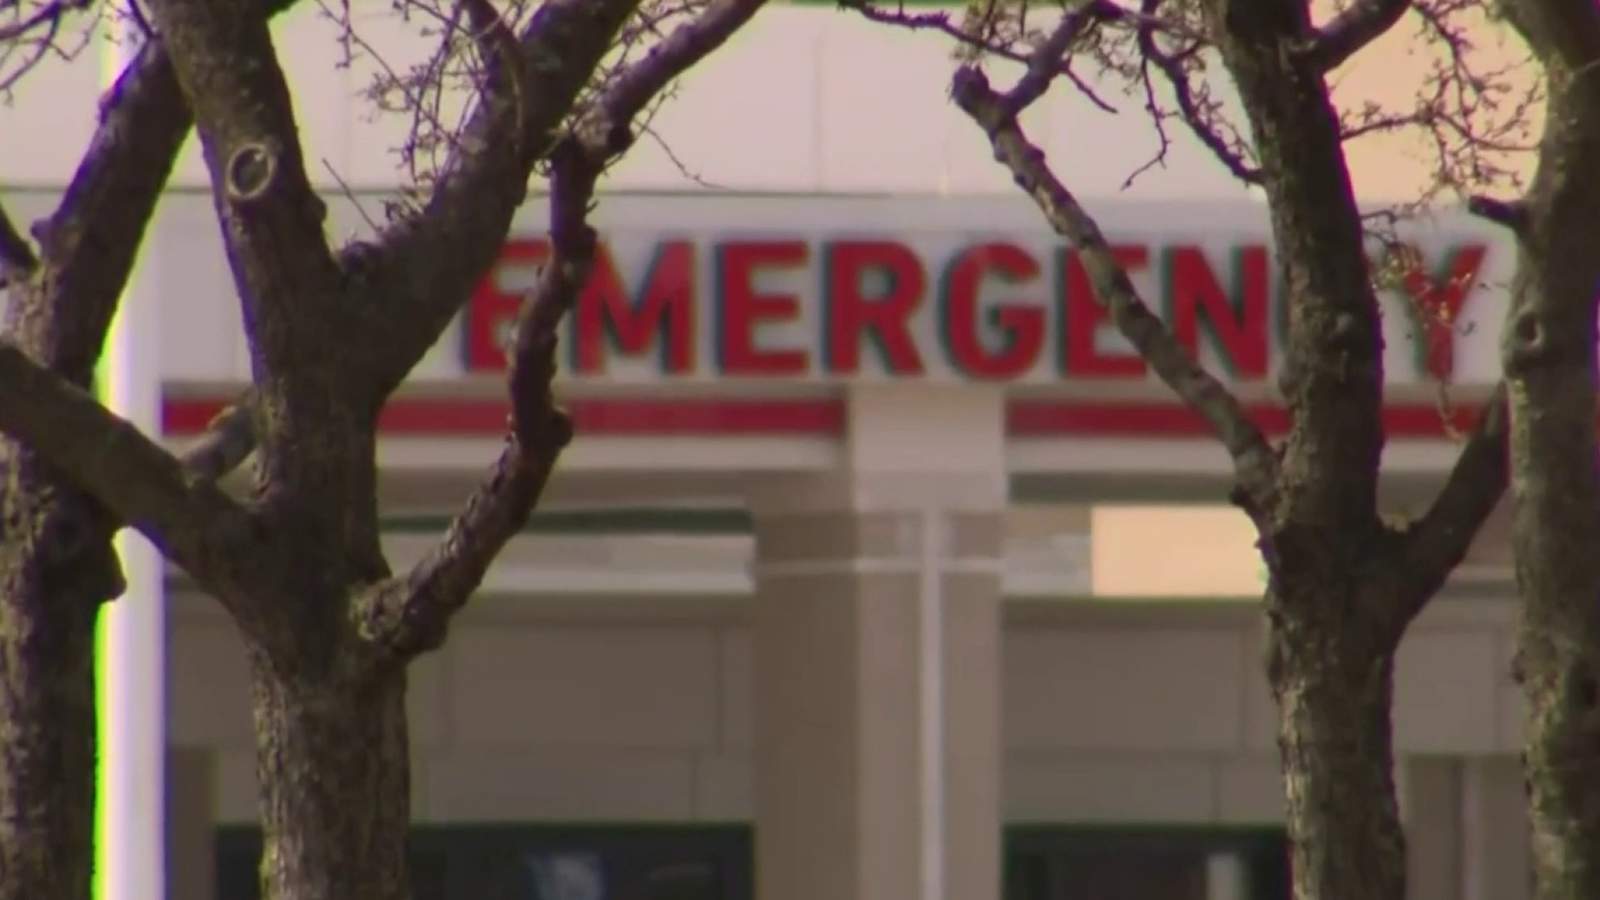 Nightside Report March 30, 2021: Mental health care backlog leaves 12-year-old stuck in emergency room for 26 days, Demand for appointments at Michigan SOS offices high as extension on renewing IDs to